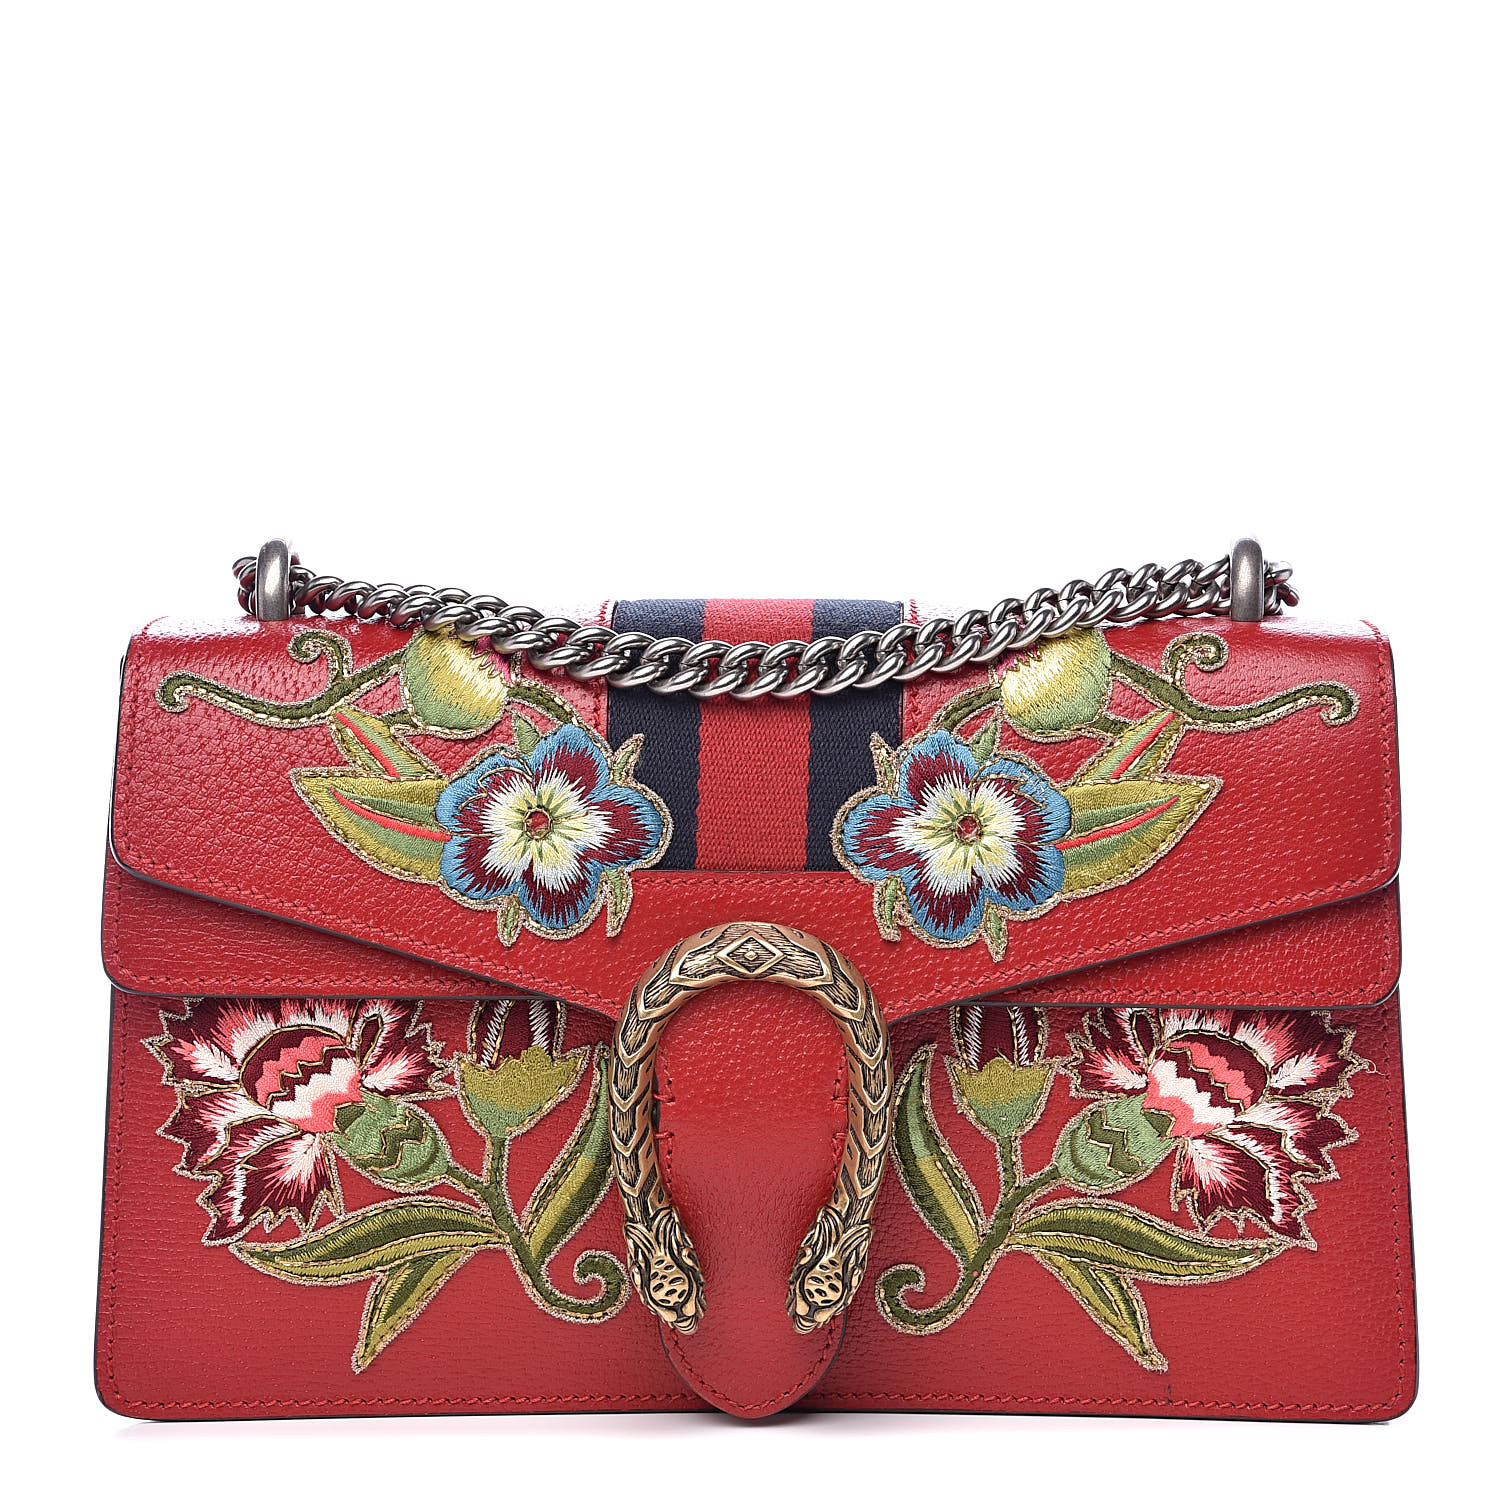 GUCCI Calfskin Small Dionysus Web Floral Embroidered Shoulder Bag Hibiscus Red 512845